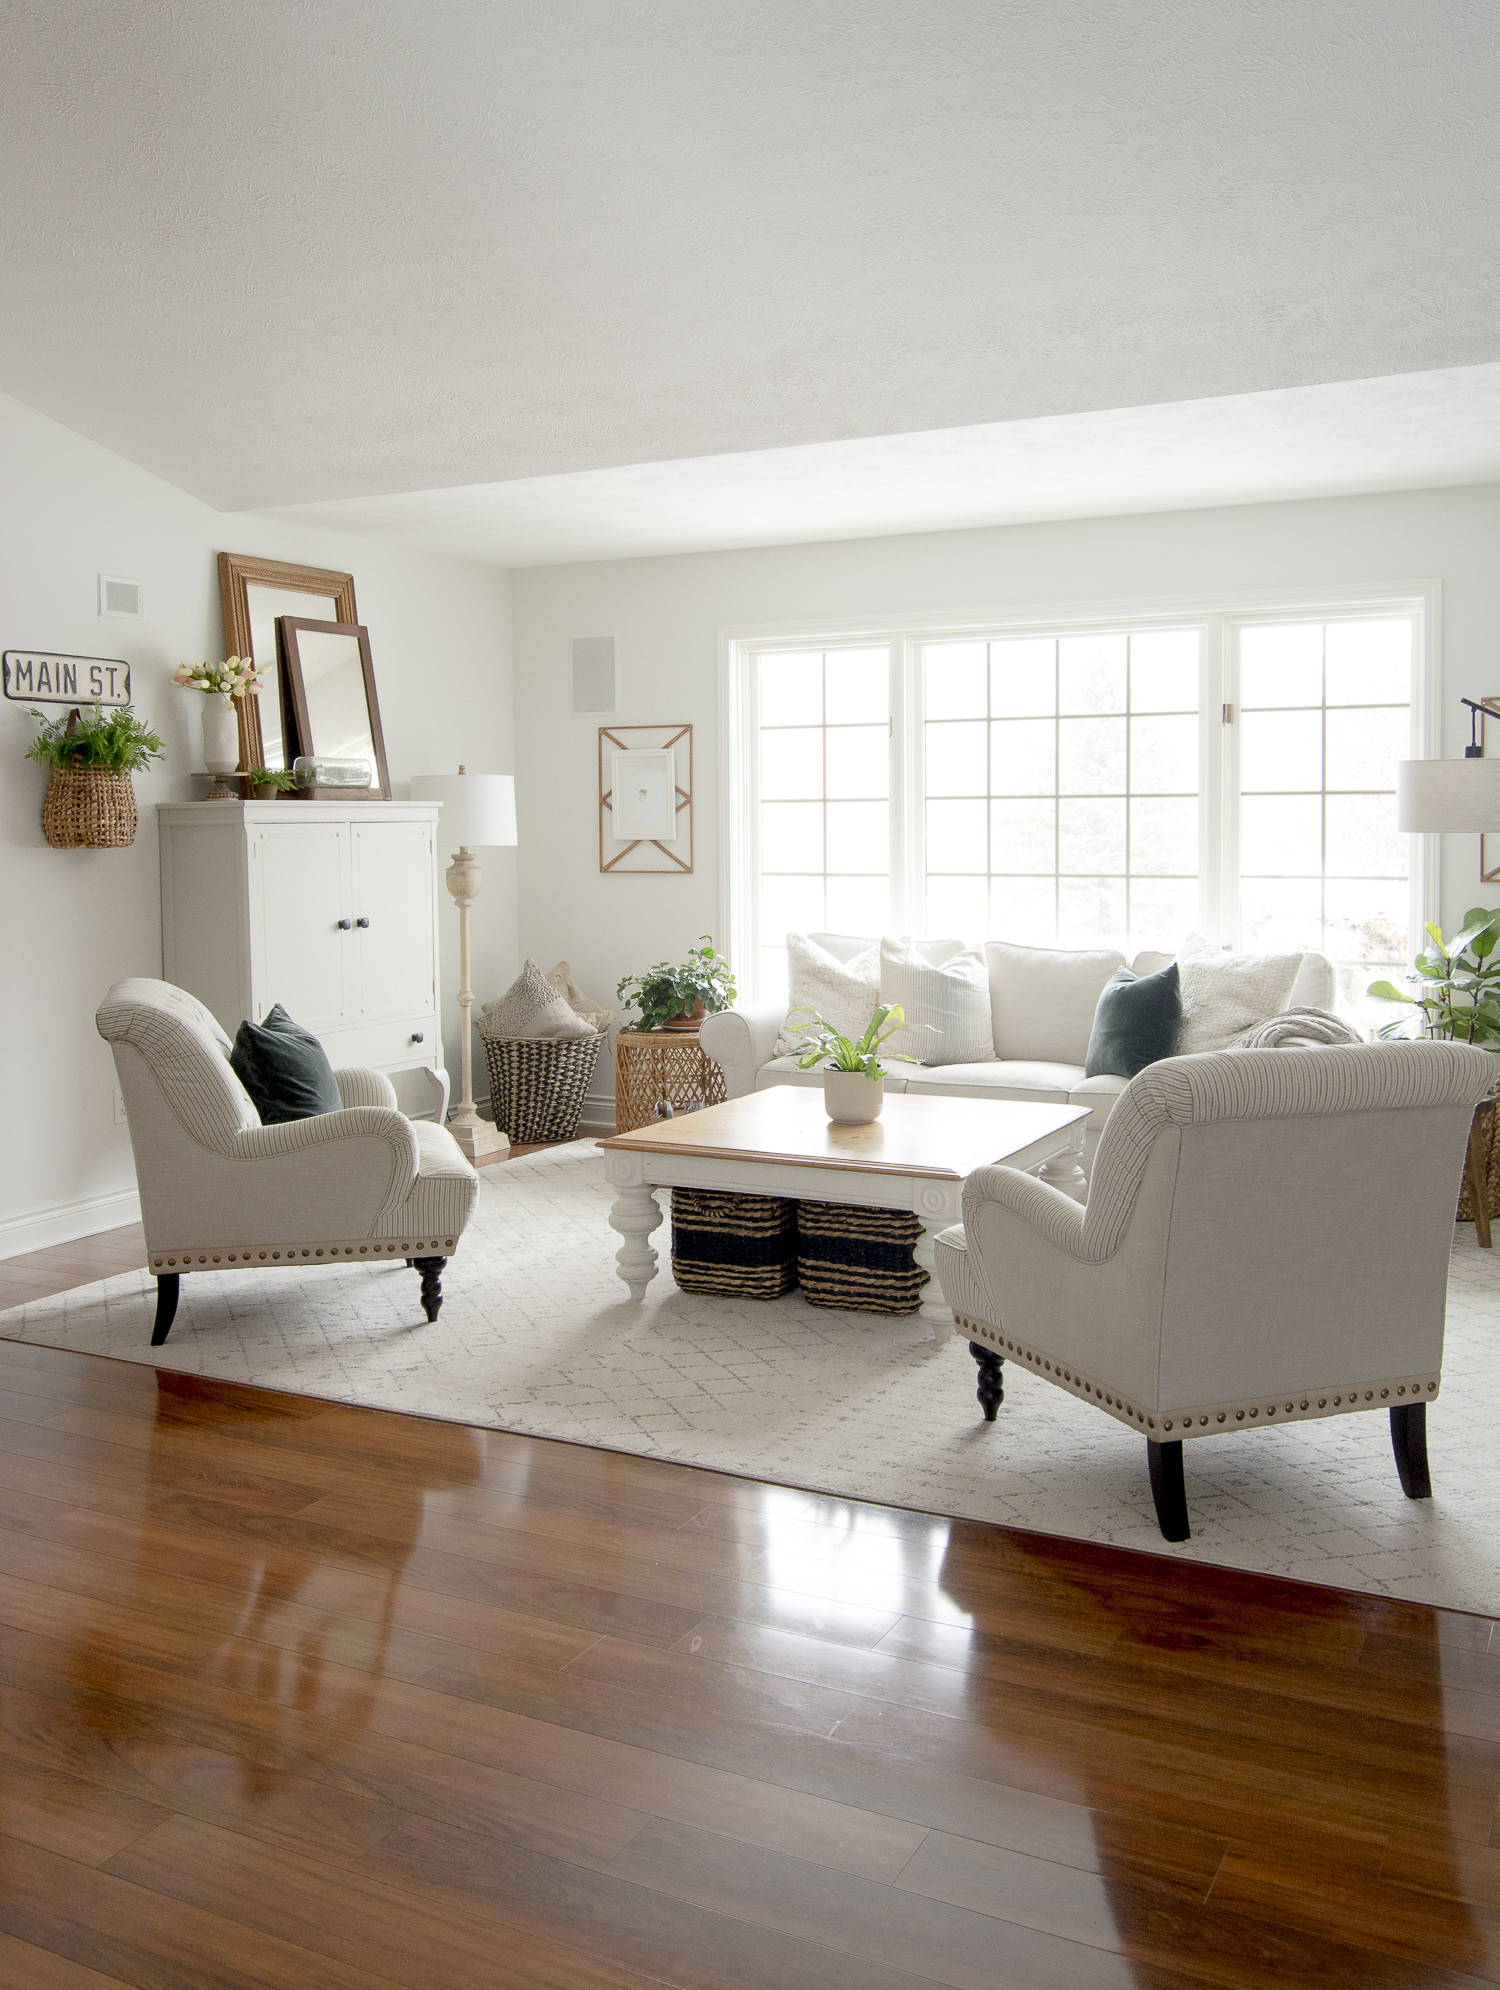 Farmhouse Living Room Chairs
 Farmhouse Living Room Furniture Layout